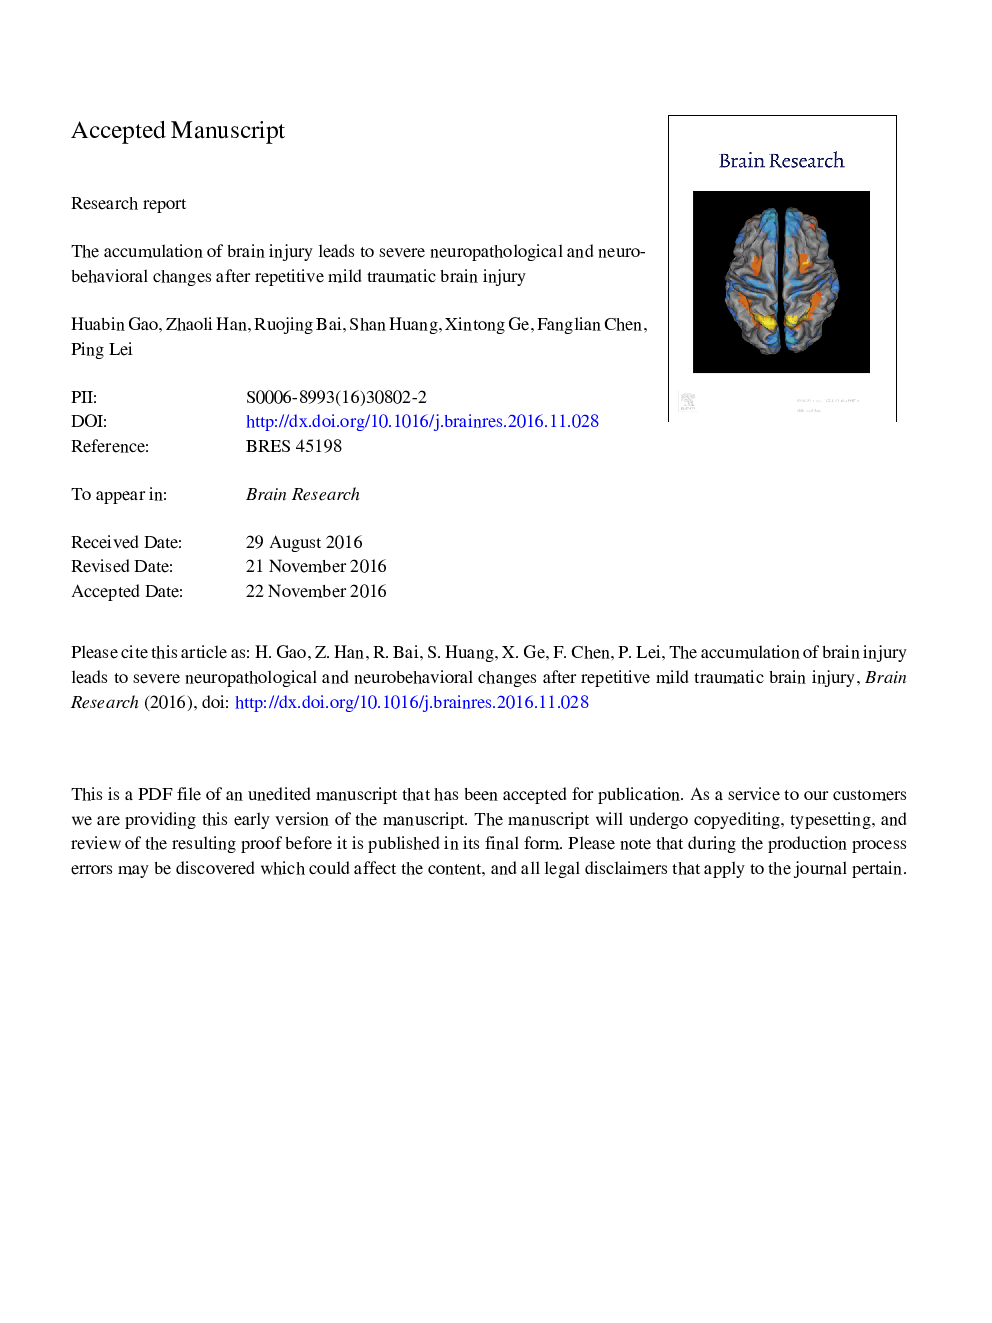 The accumulation of brain injury leads to severe neuropathological and neurobehavioral changes after repetitive mild traumatic brain injury